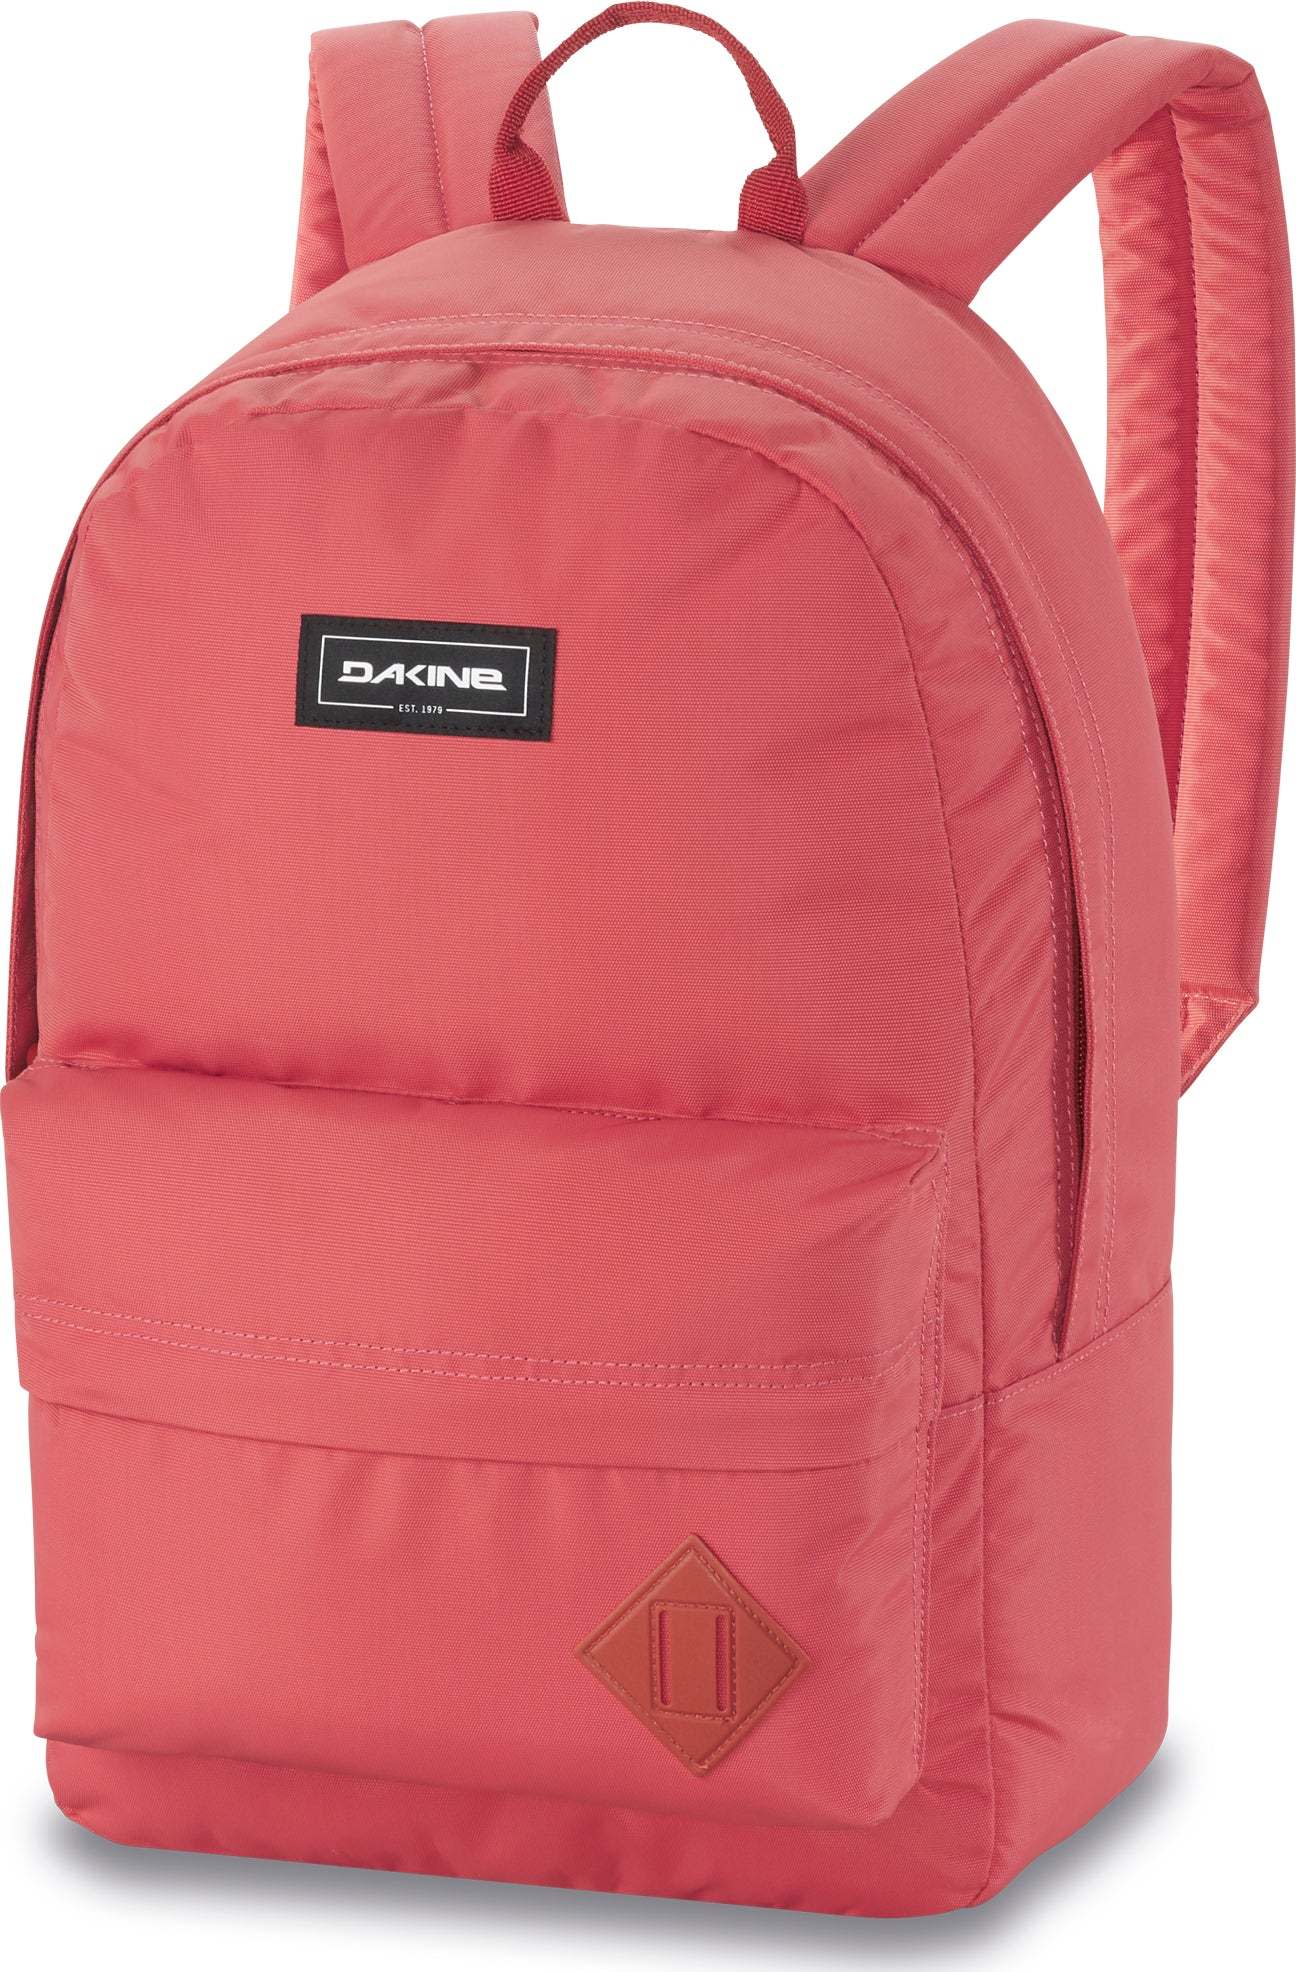 365 Pack 21L Backpack Mineral Red